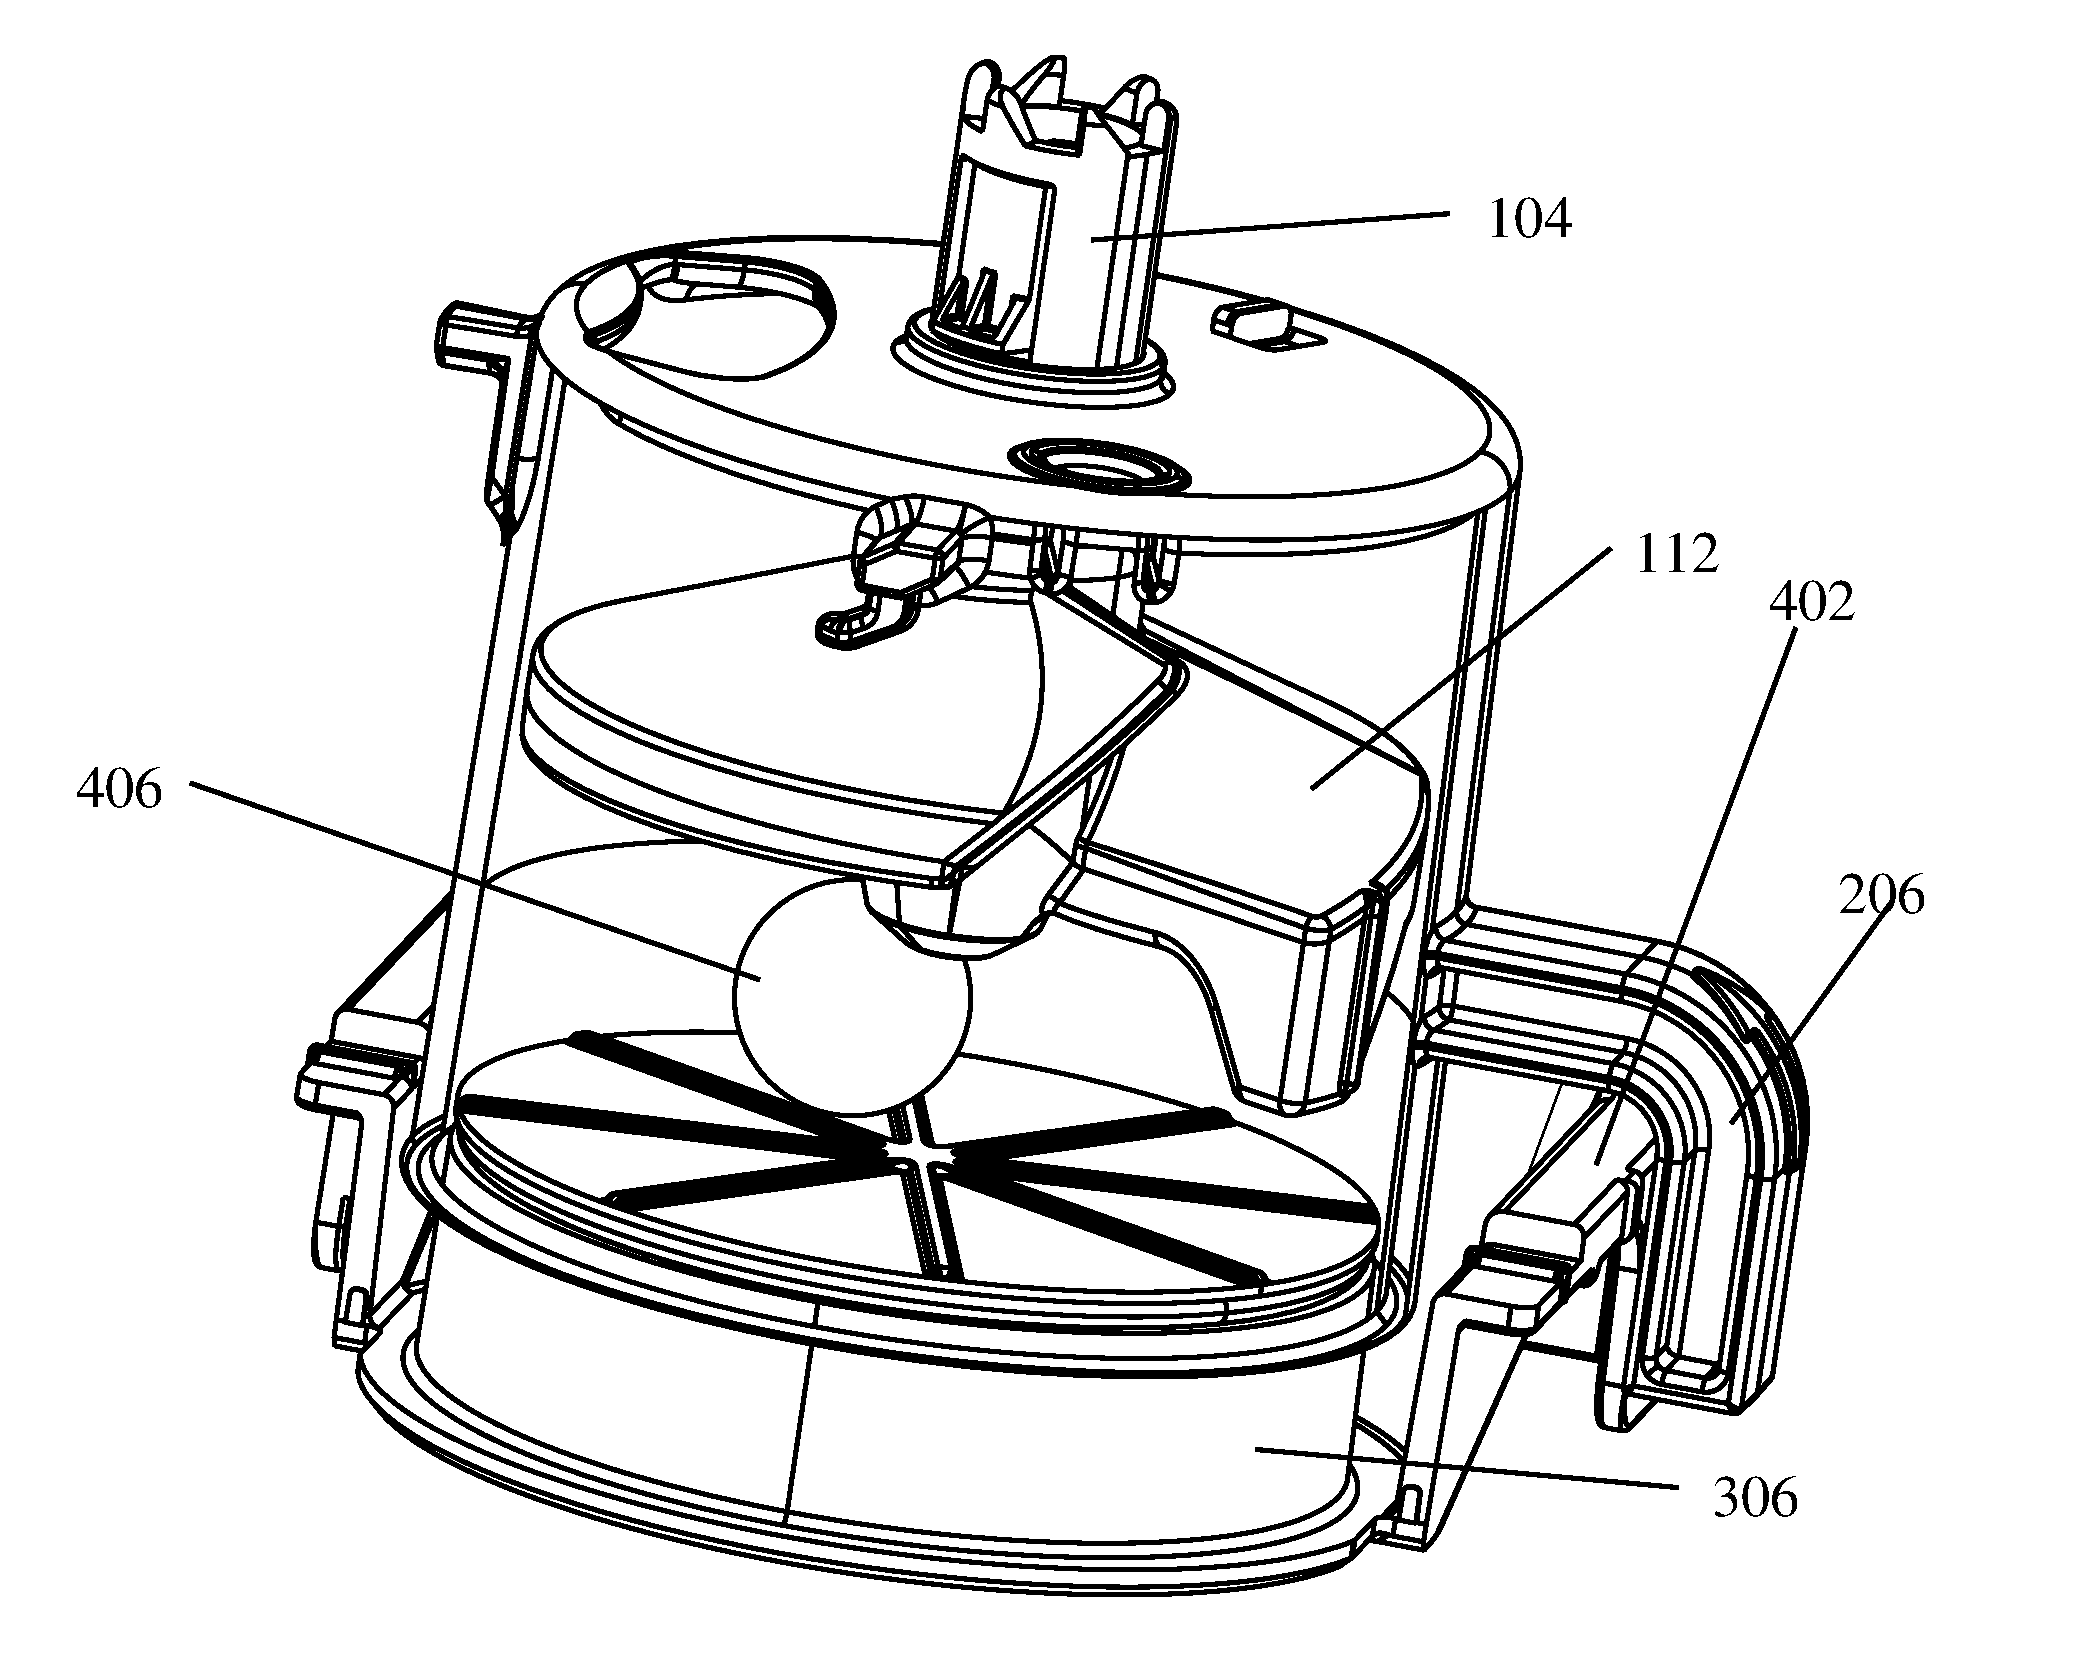 Method for an adaptive kneading technology for a food preparation appliance